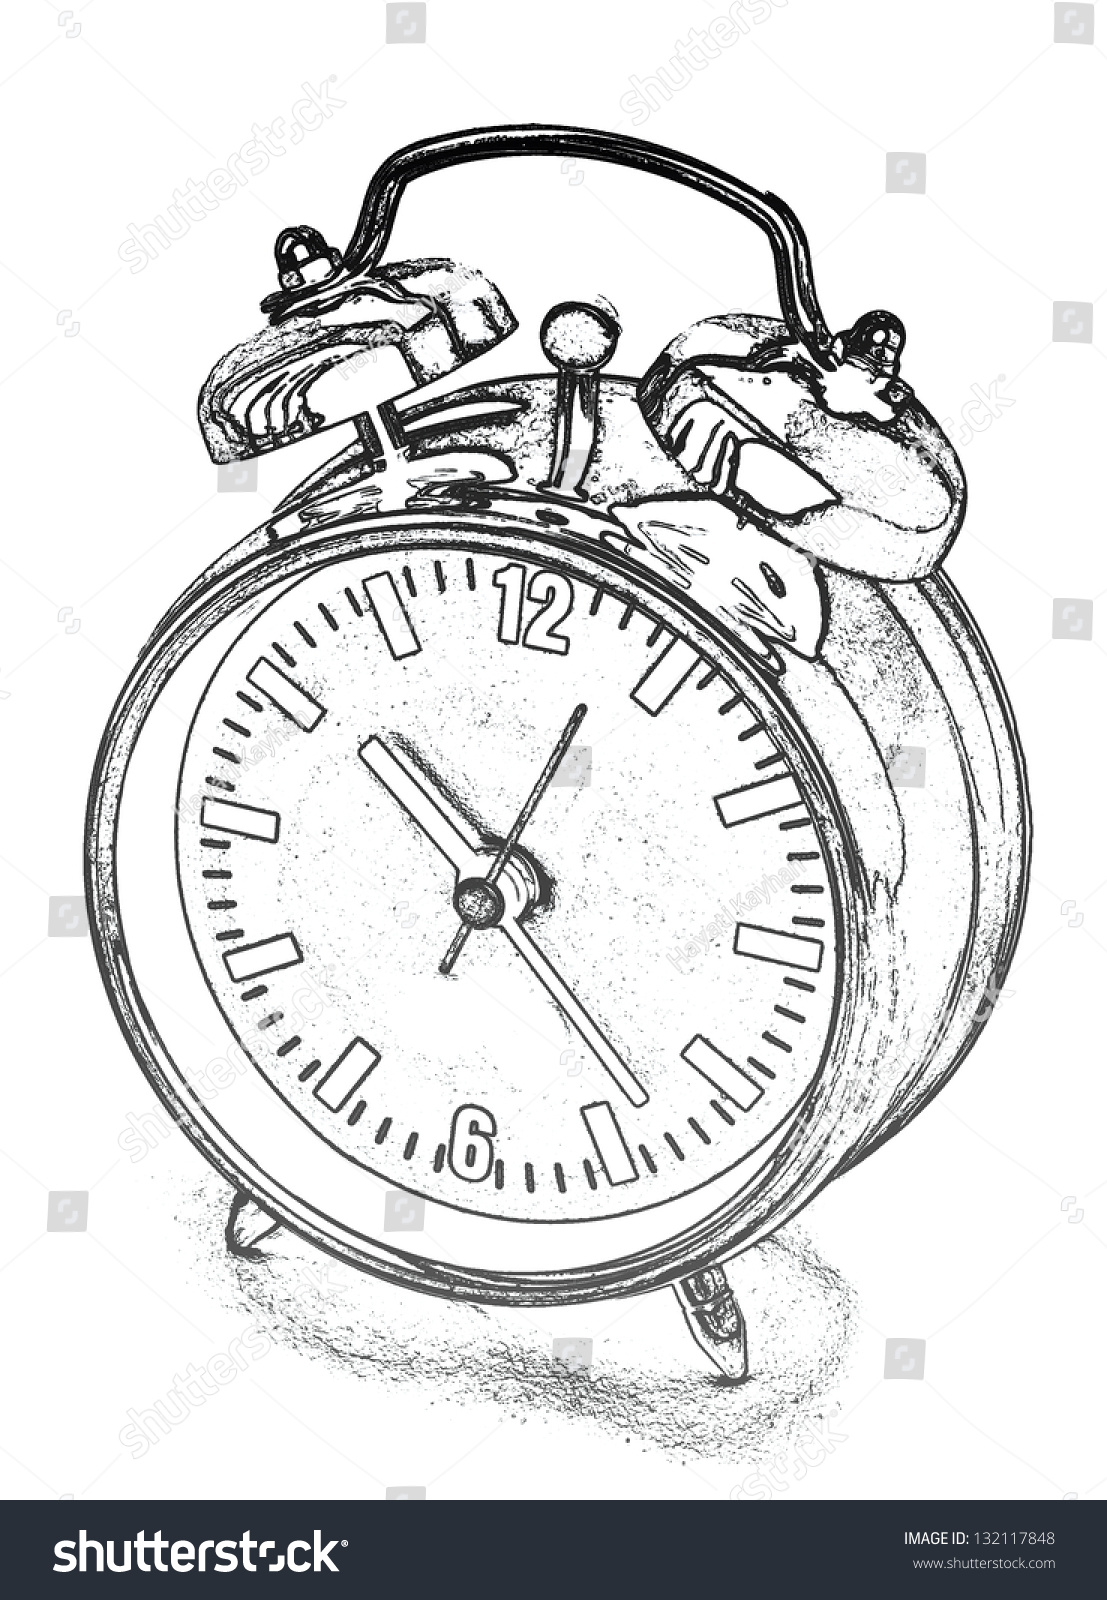 Alarm Clock Drawing : Alarm clock in hand drawn style. - Go Images Net